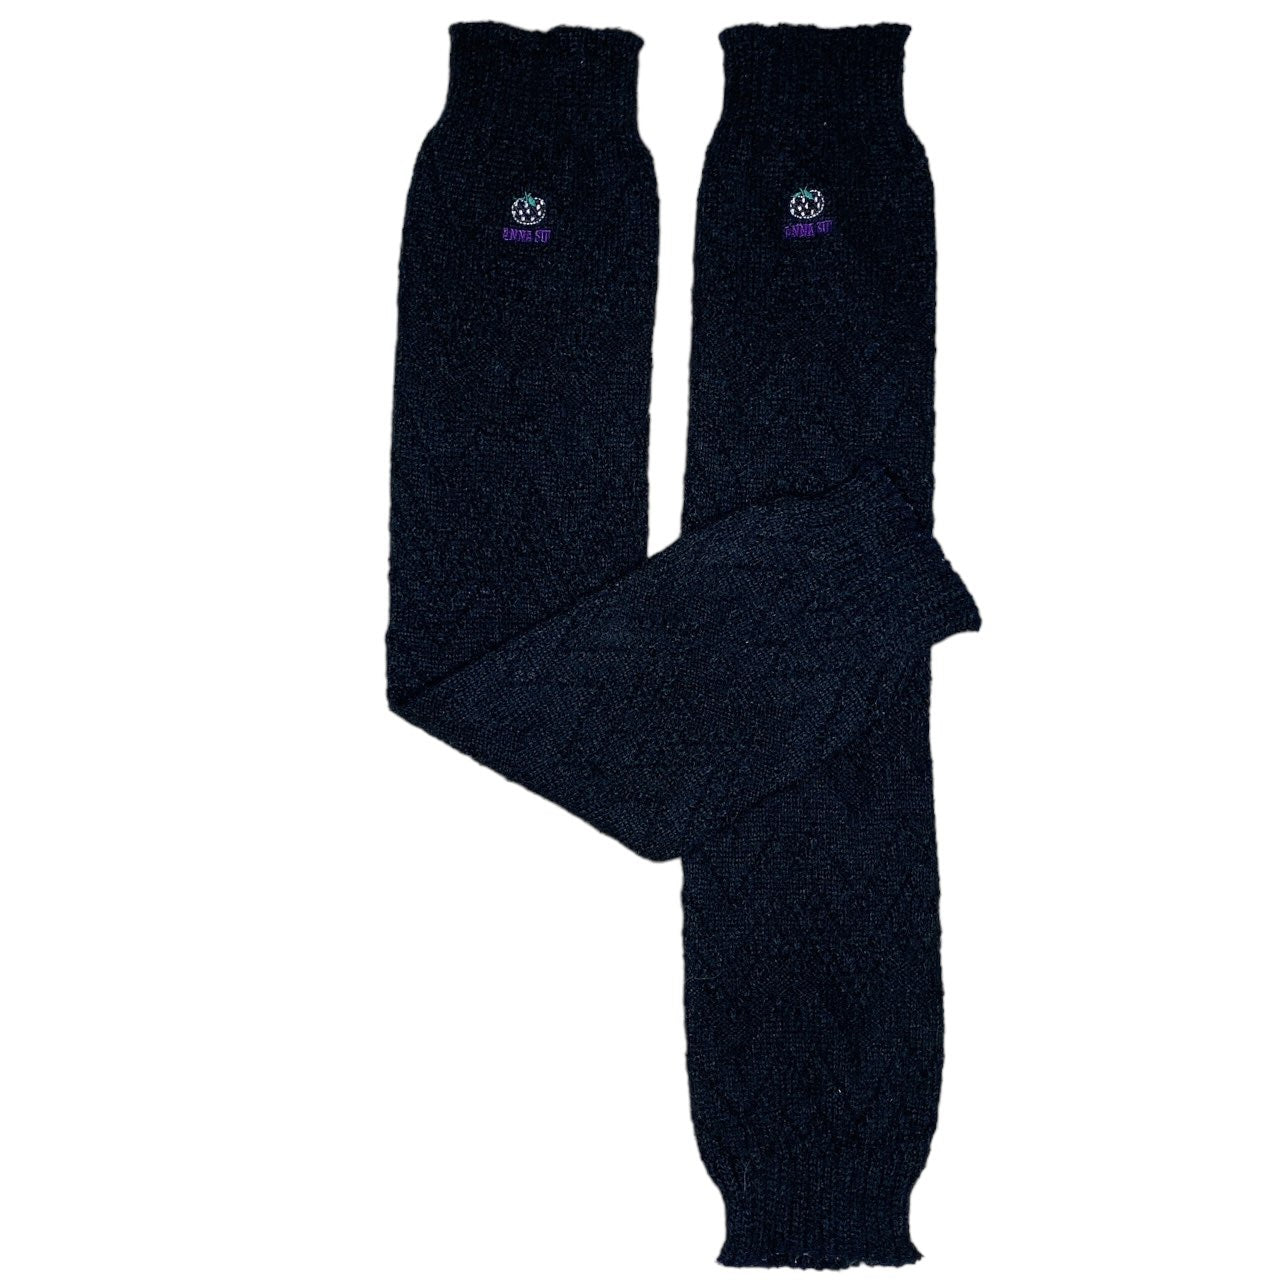 Y2K Anna Sui Berry Embroidery Black Knit Leg Warmers